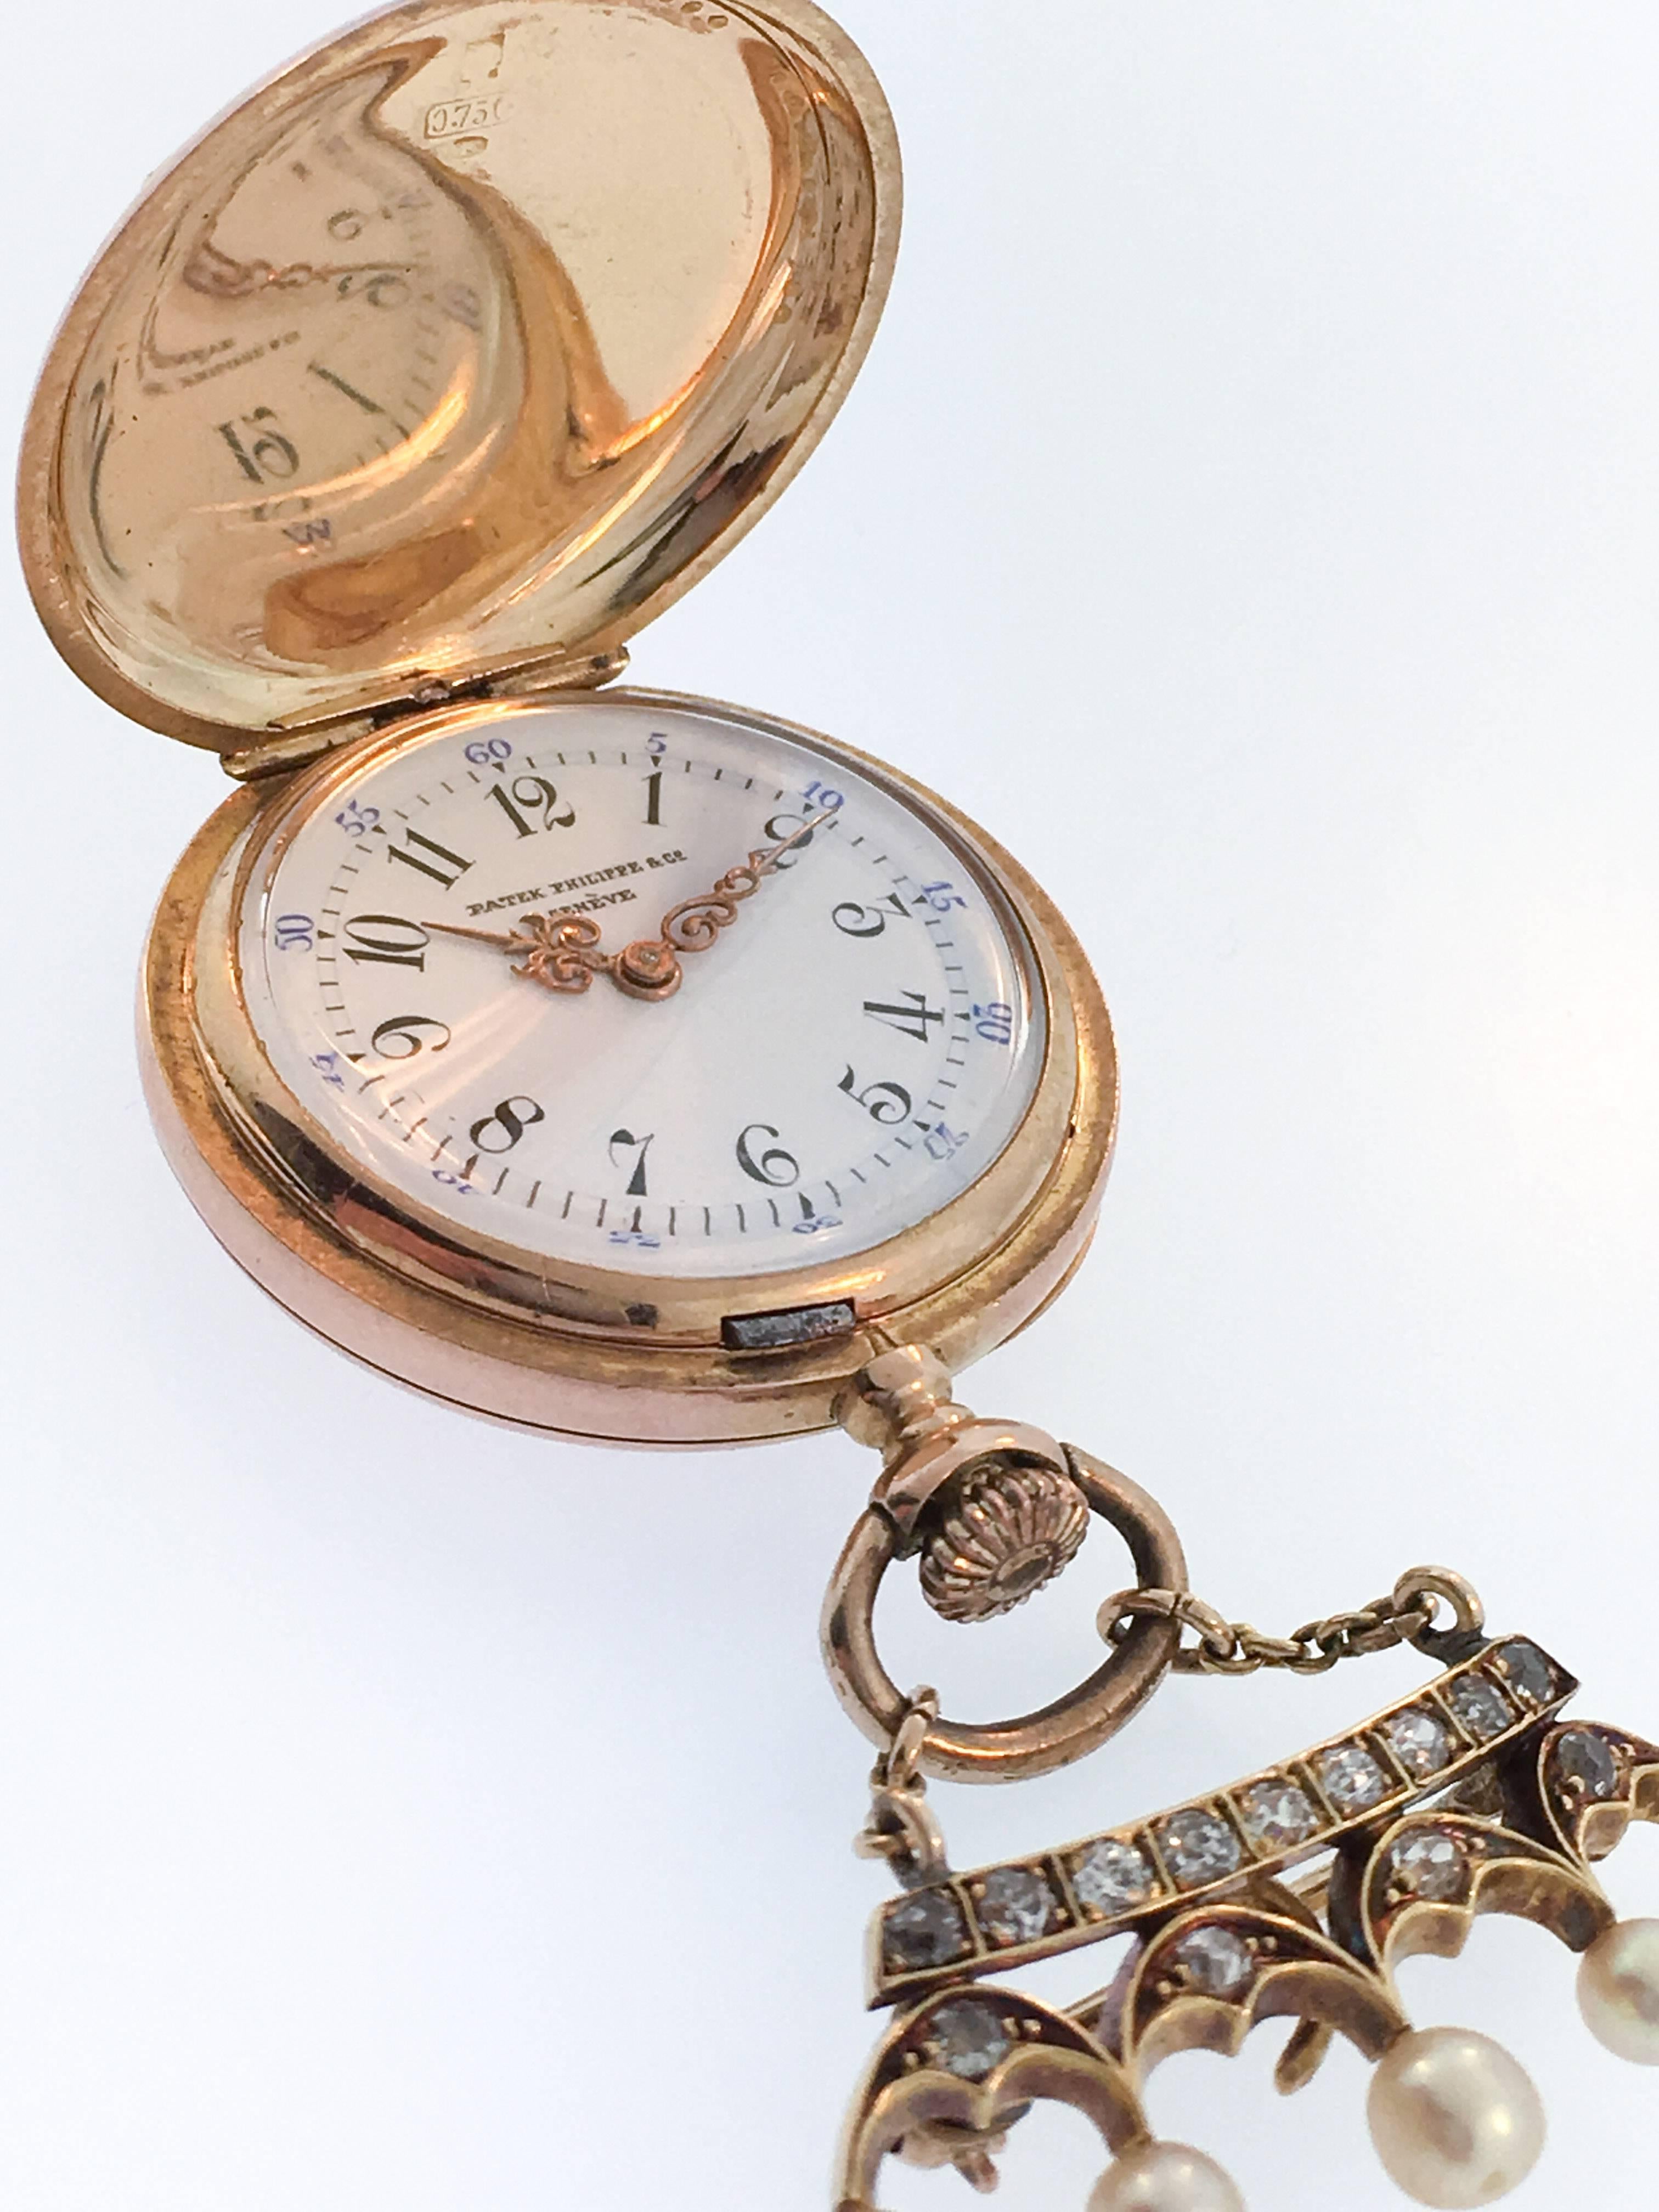 Patek Philippe Lady's Pocket Watch adorned with seed pearls and a diamond. The watch features a pin with a crown with 5 pearls and diamonds (Crown of Count). The watch dates early XXth Century. Case, dial, hands and movement are 100% Patek Philippe